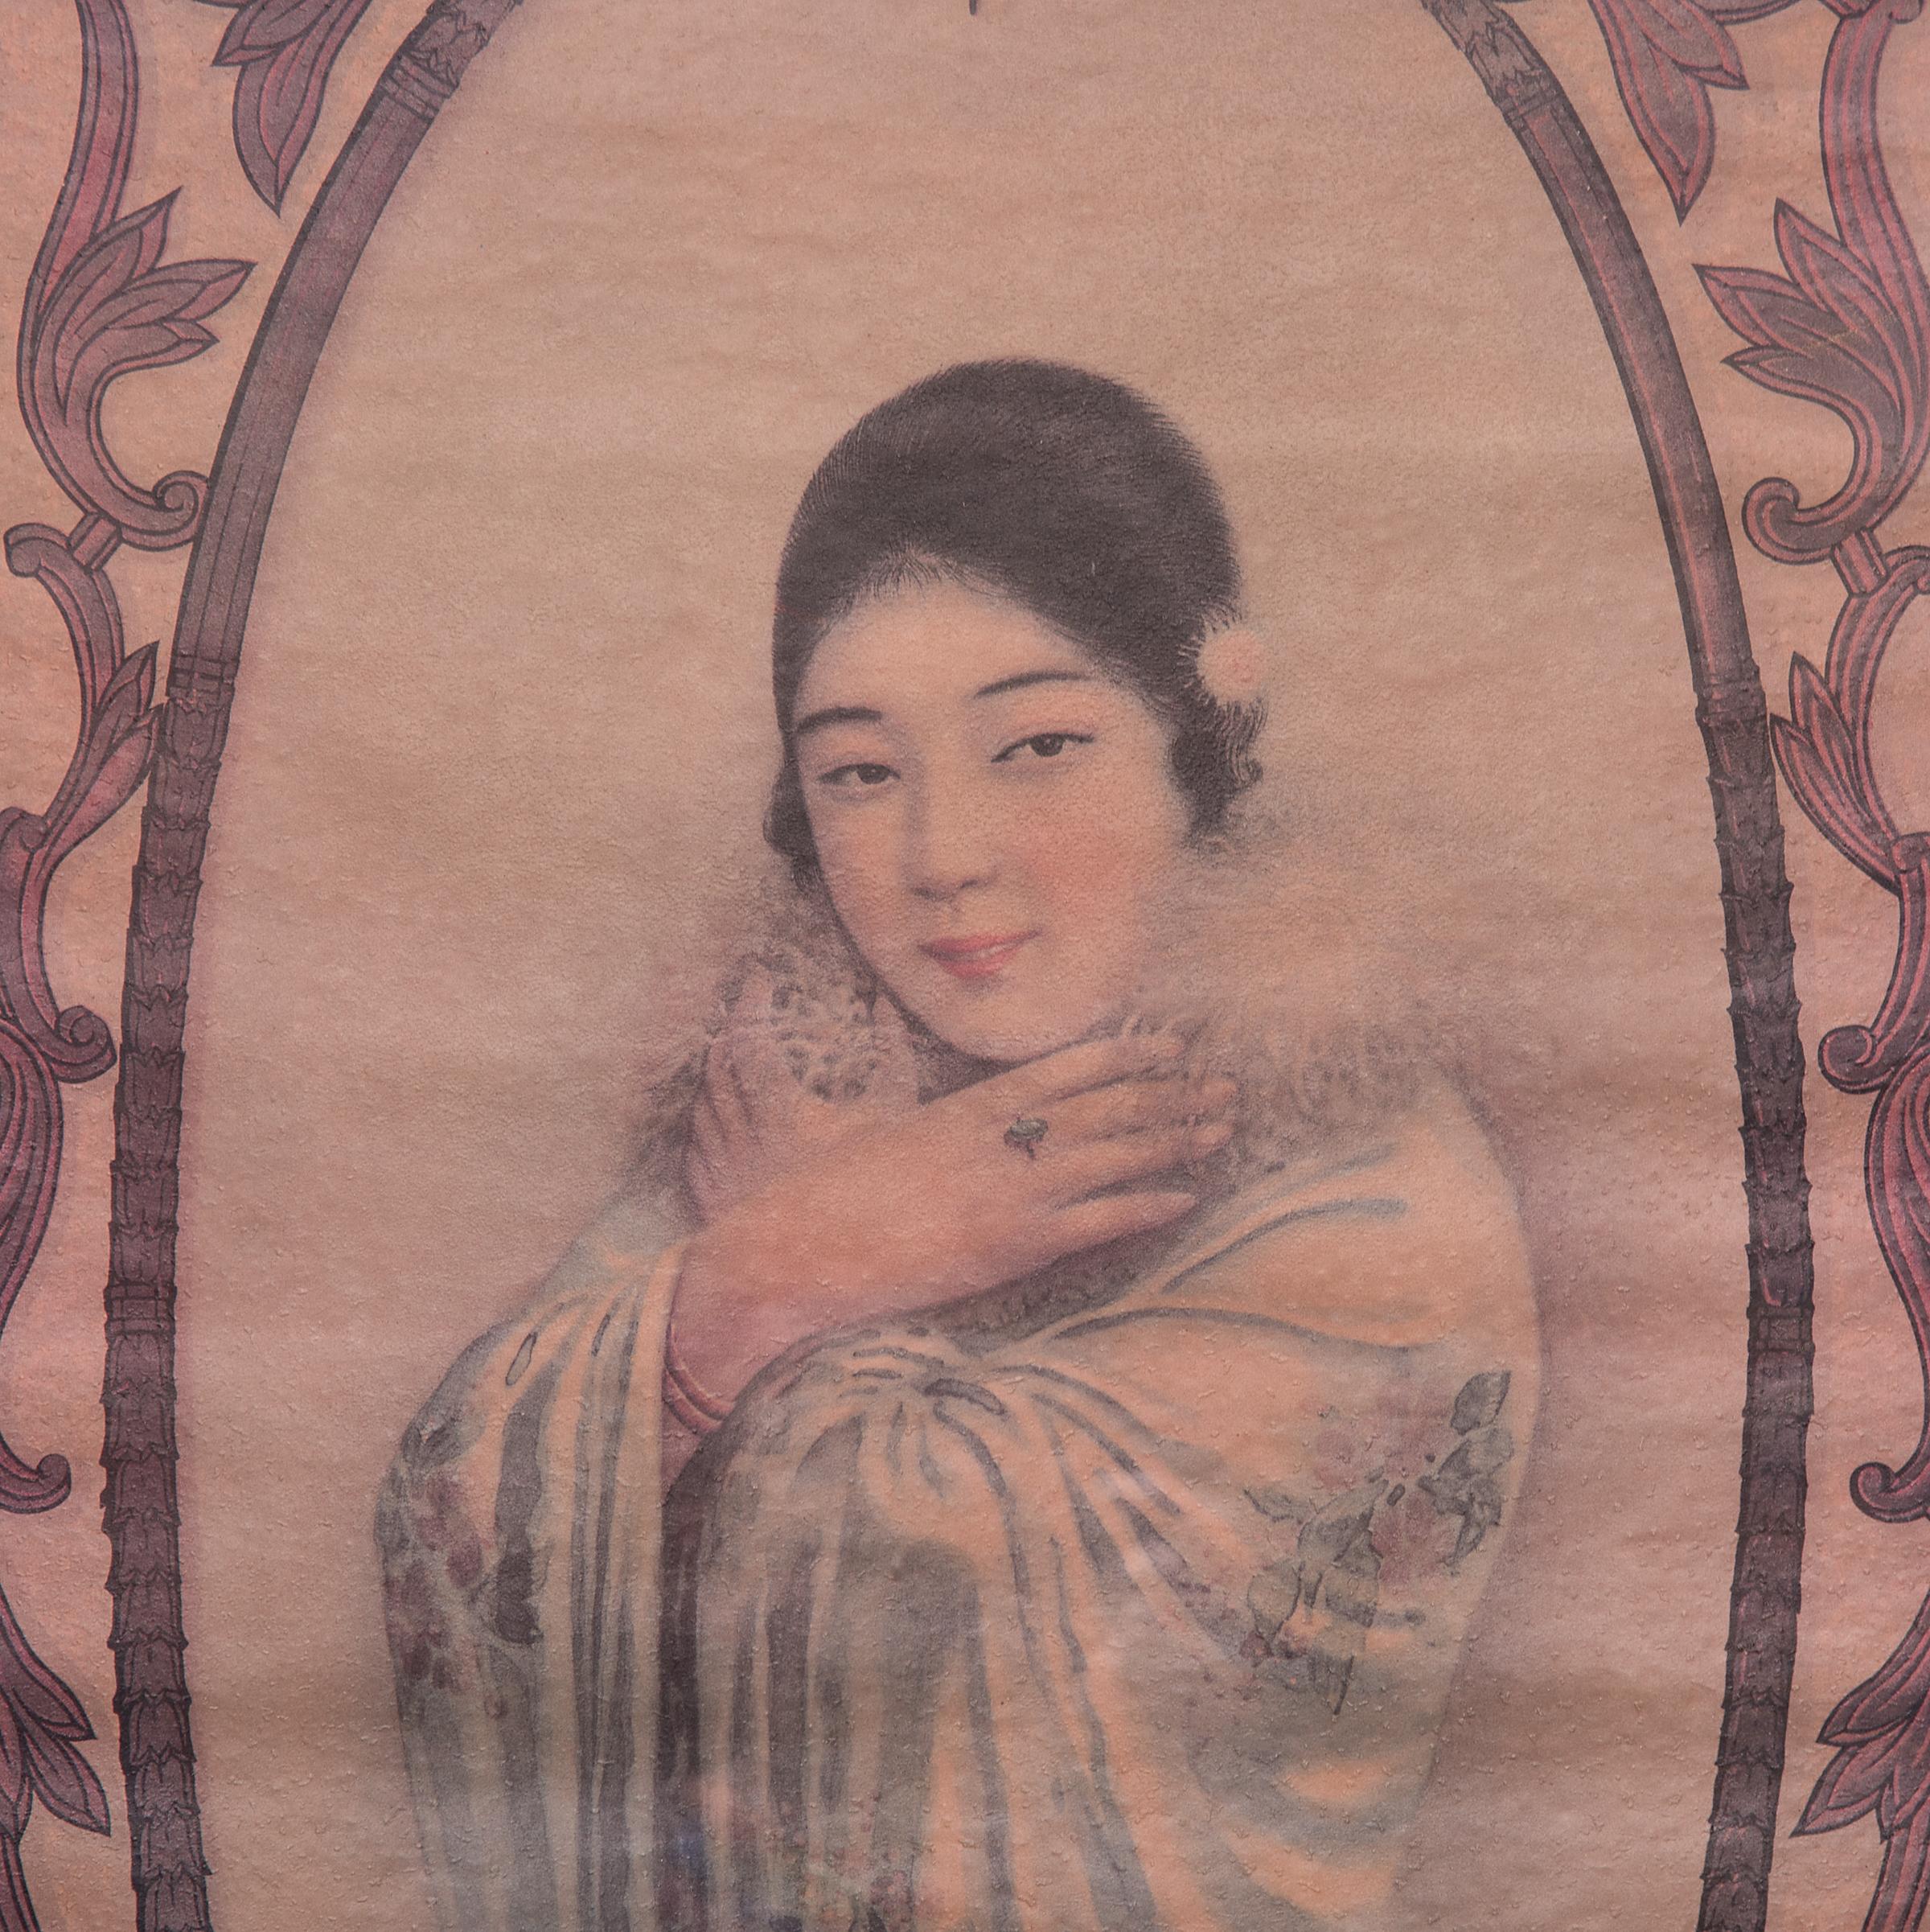 This framed advertising poster for Hatamen Cigarettes from the late 1920s melds the meticulous detail of traditional Chinese painting with the nuanced color and fine resolution of color lithography. Ensconced in a filigree frame, a woman peers out